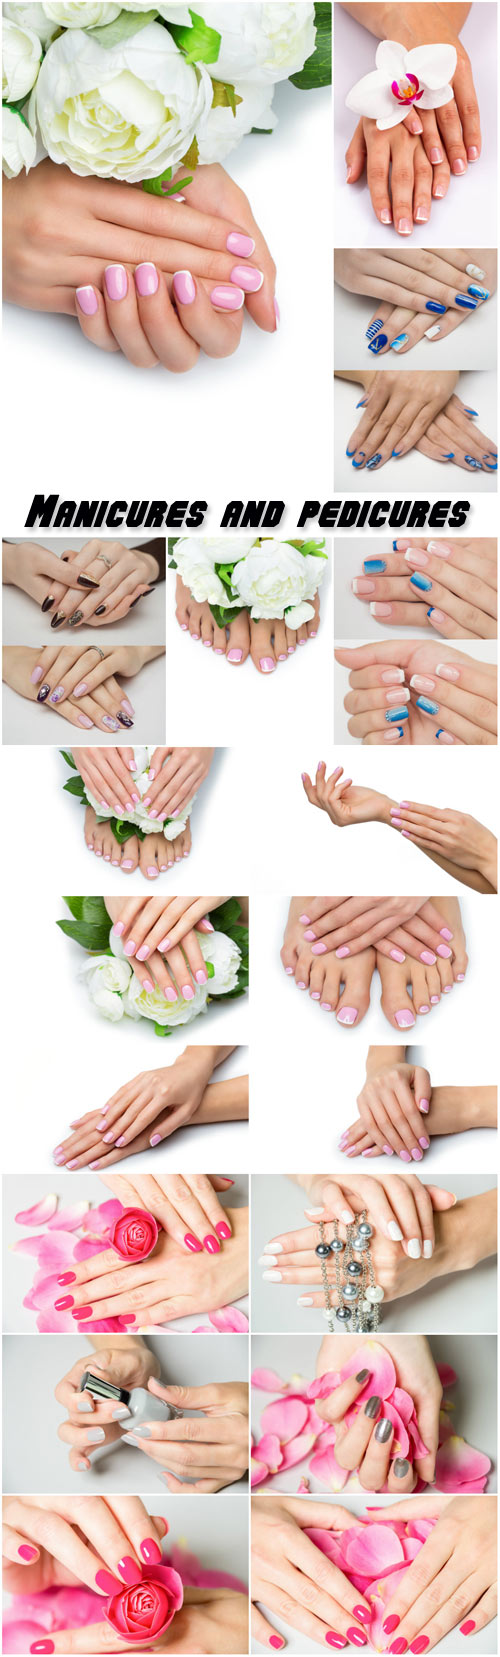 Manicures and pedicures, beautiful hands